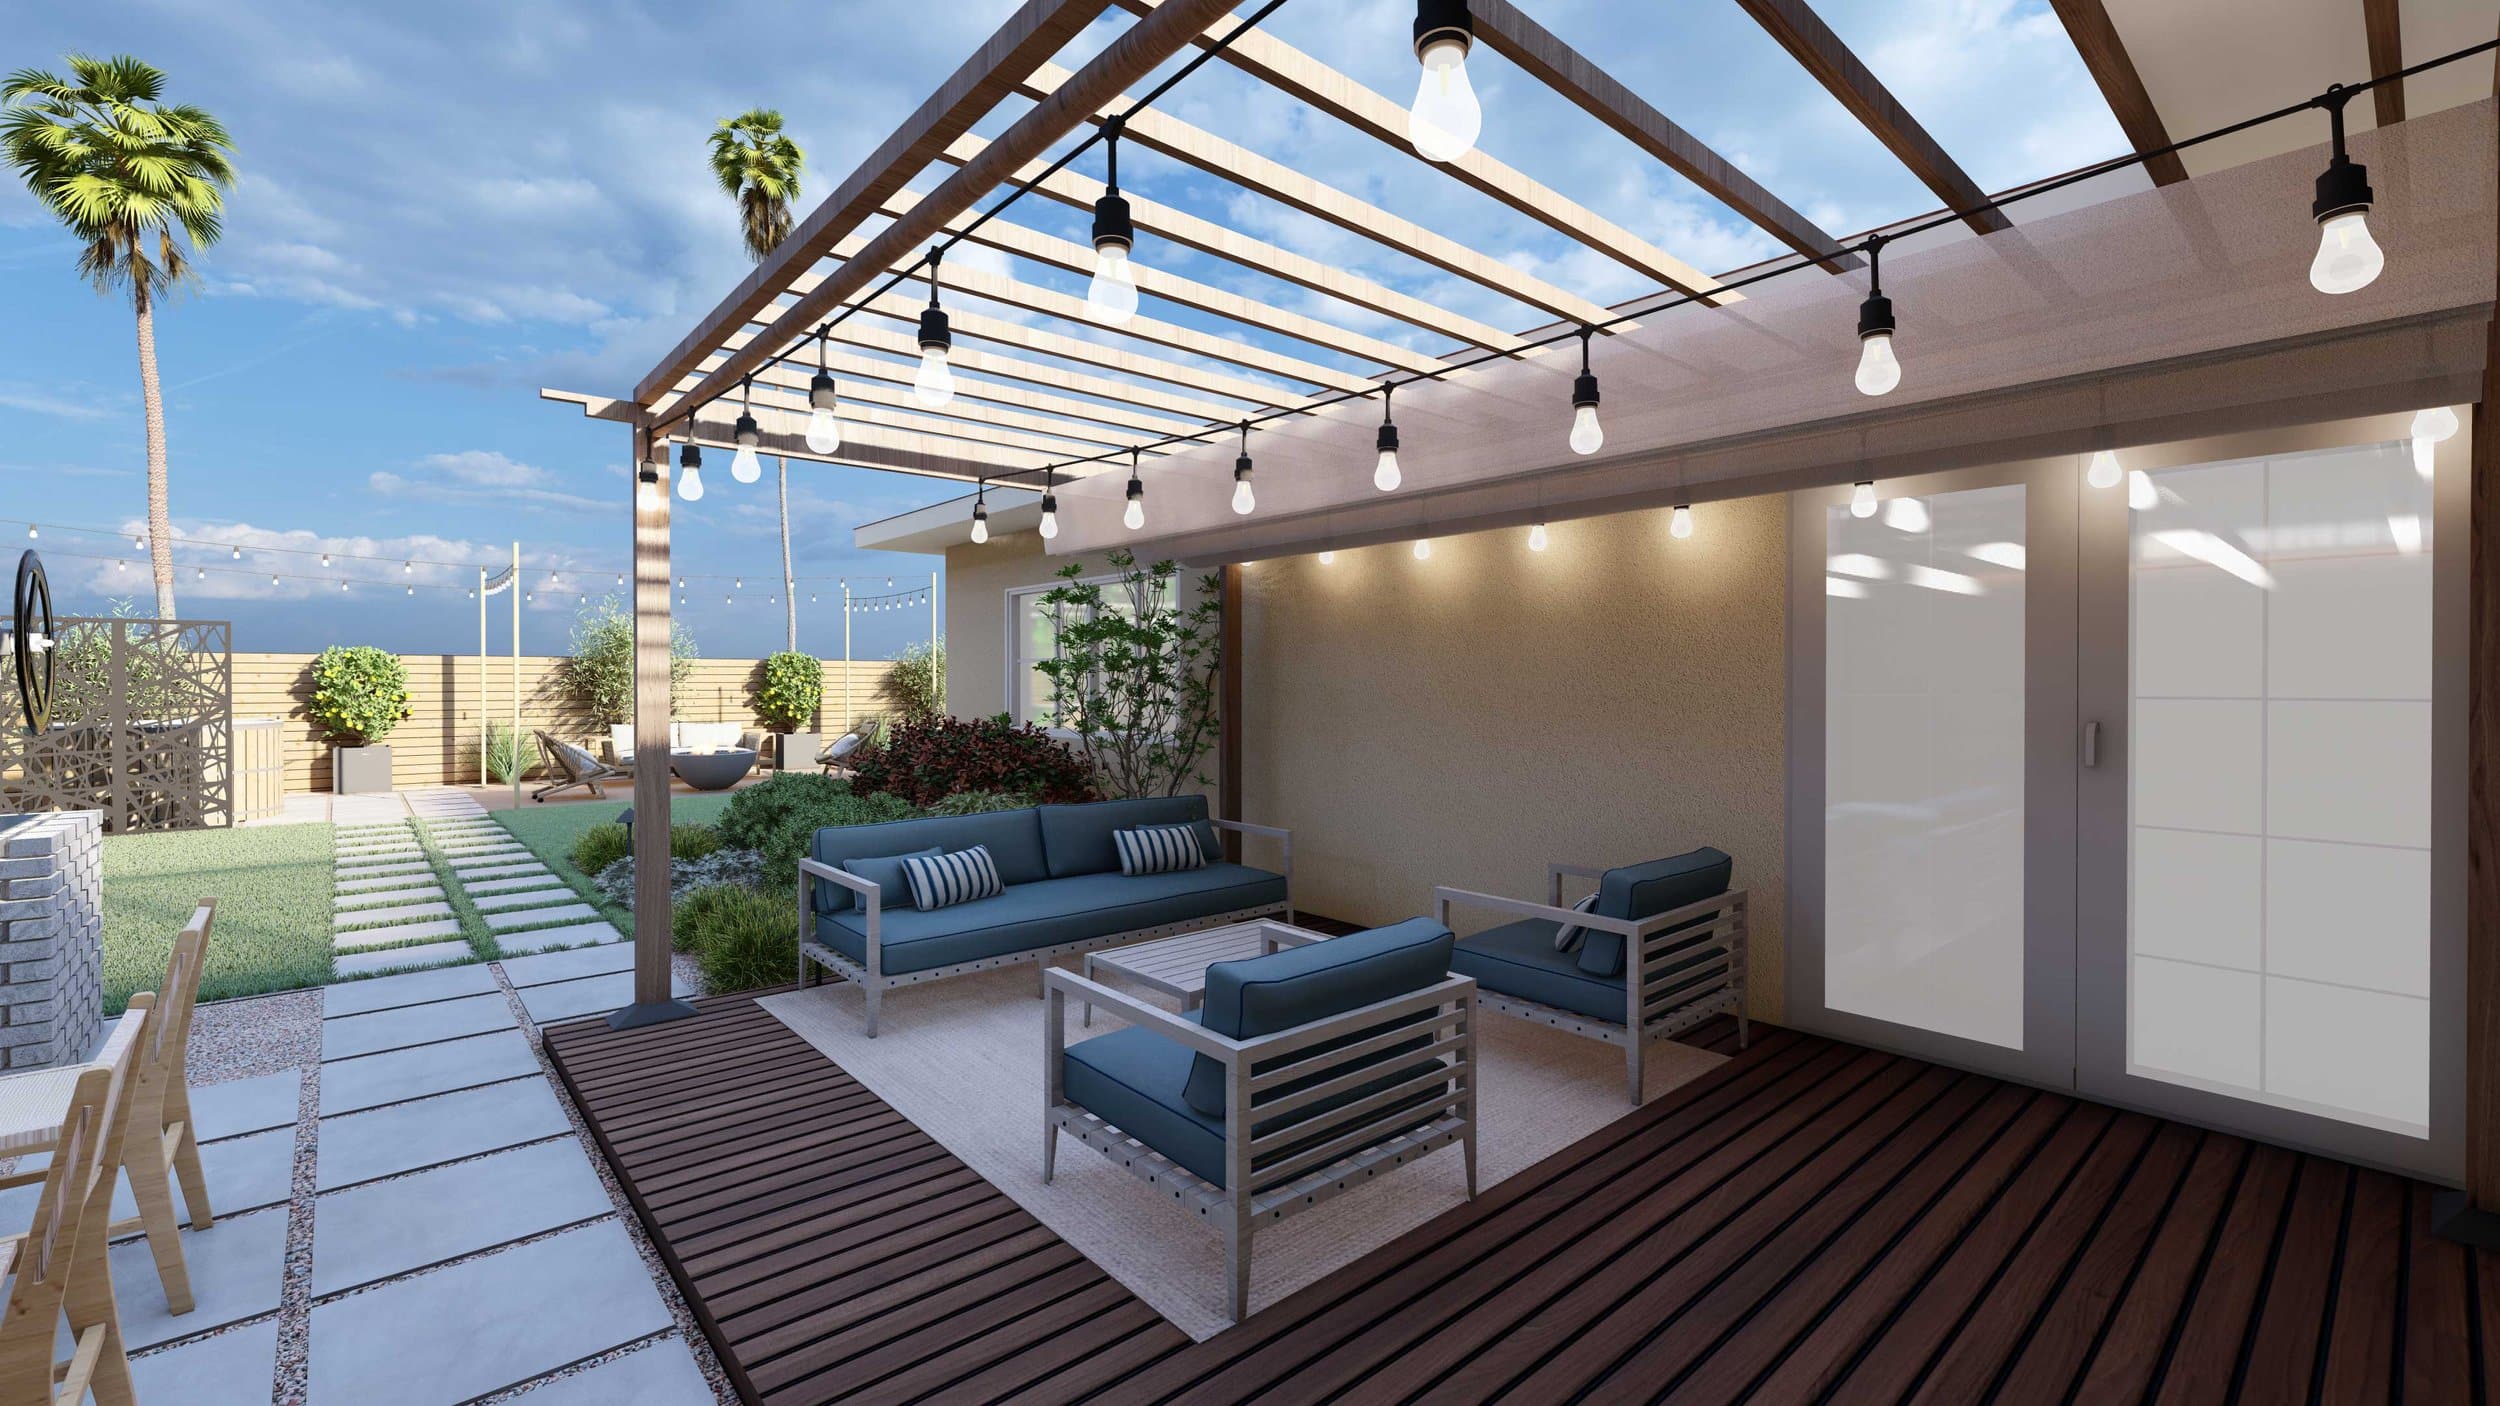 back patio with pergola above attached to home, string lights, and outdoor lounge seating